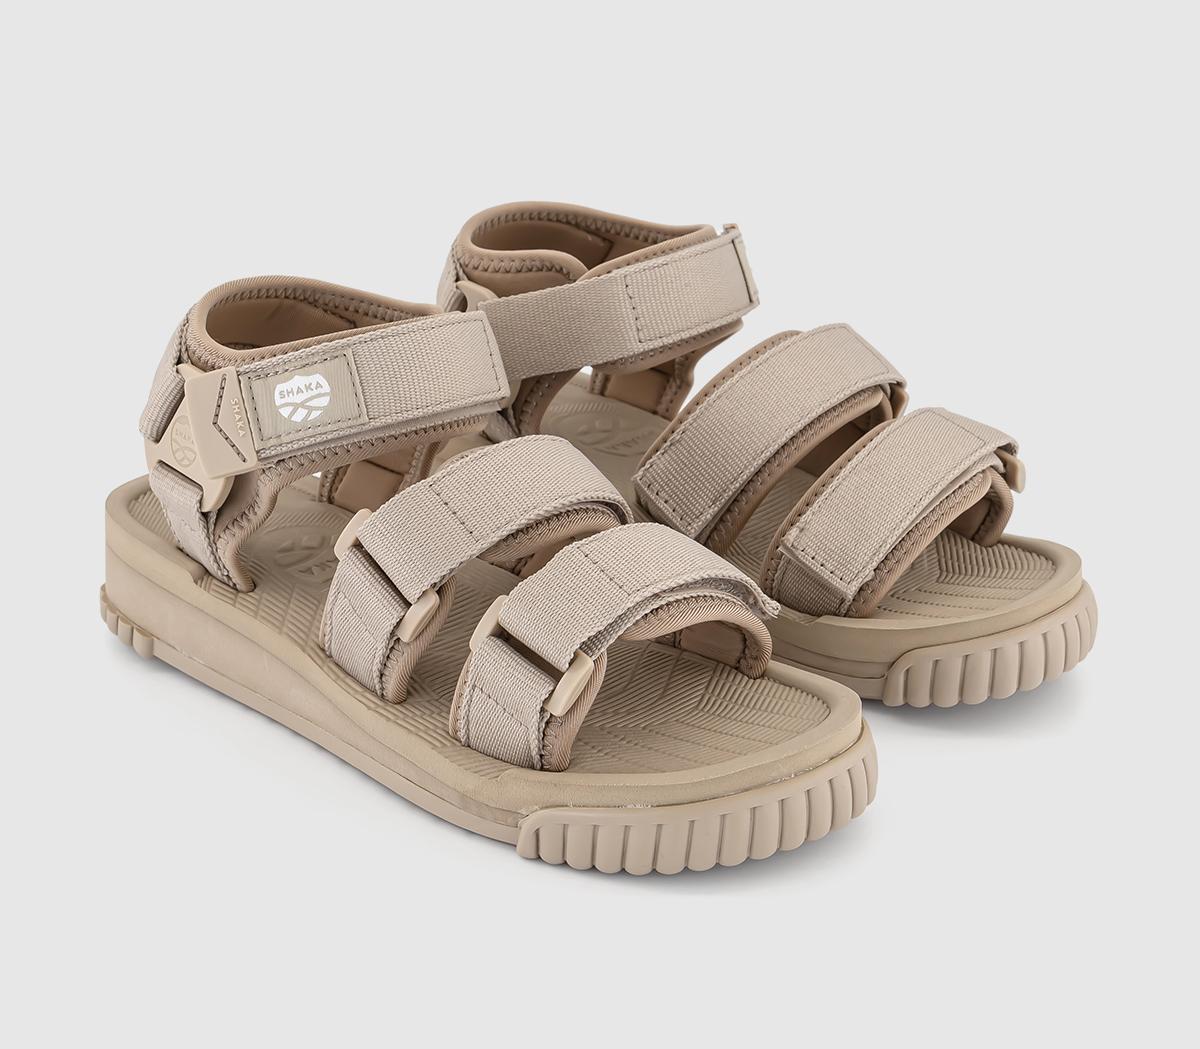 Shaka Neo Bungy Sandals Taupe Natural, 8